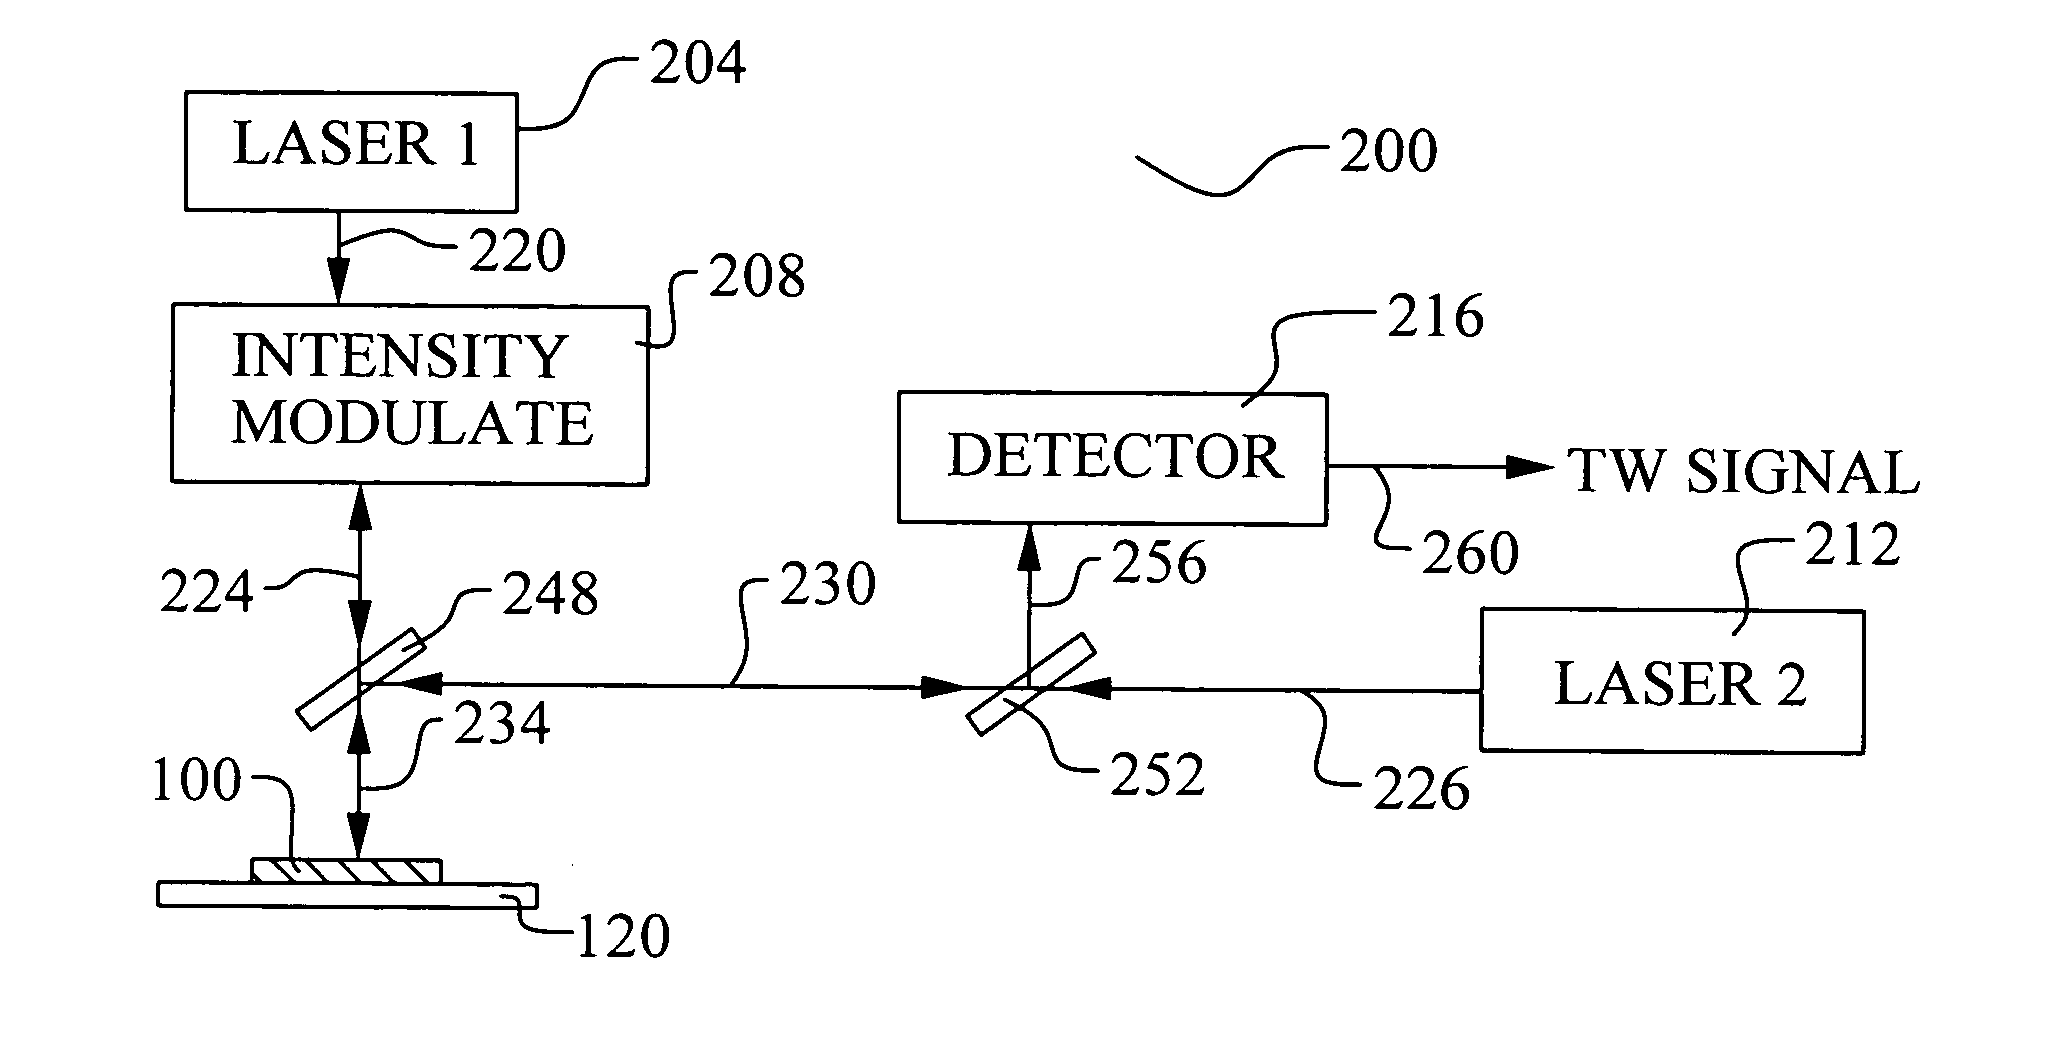 Method to monitor silicide formation on product wafers